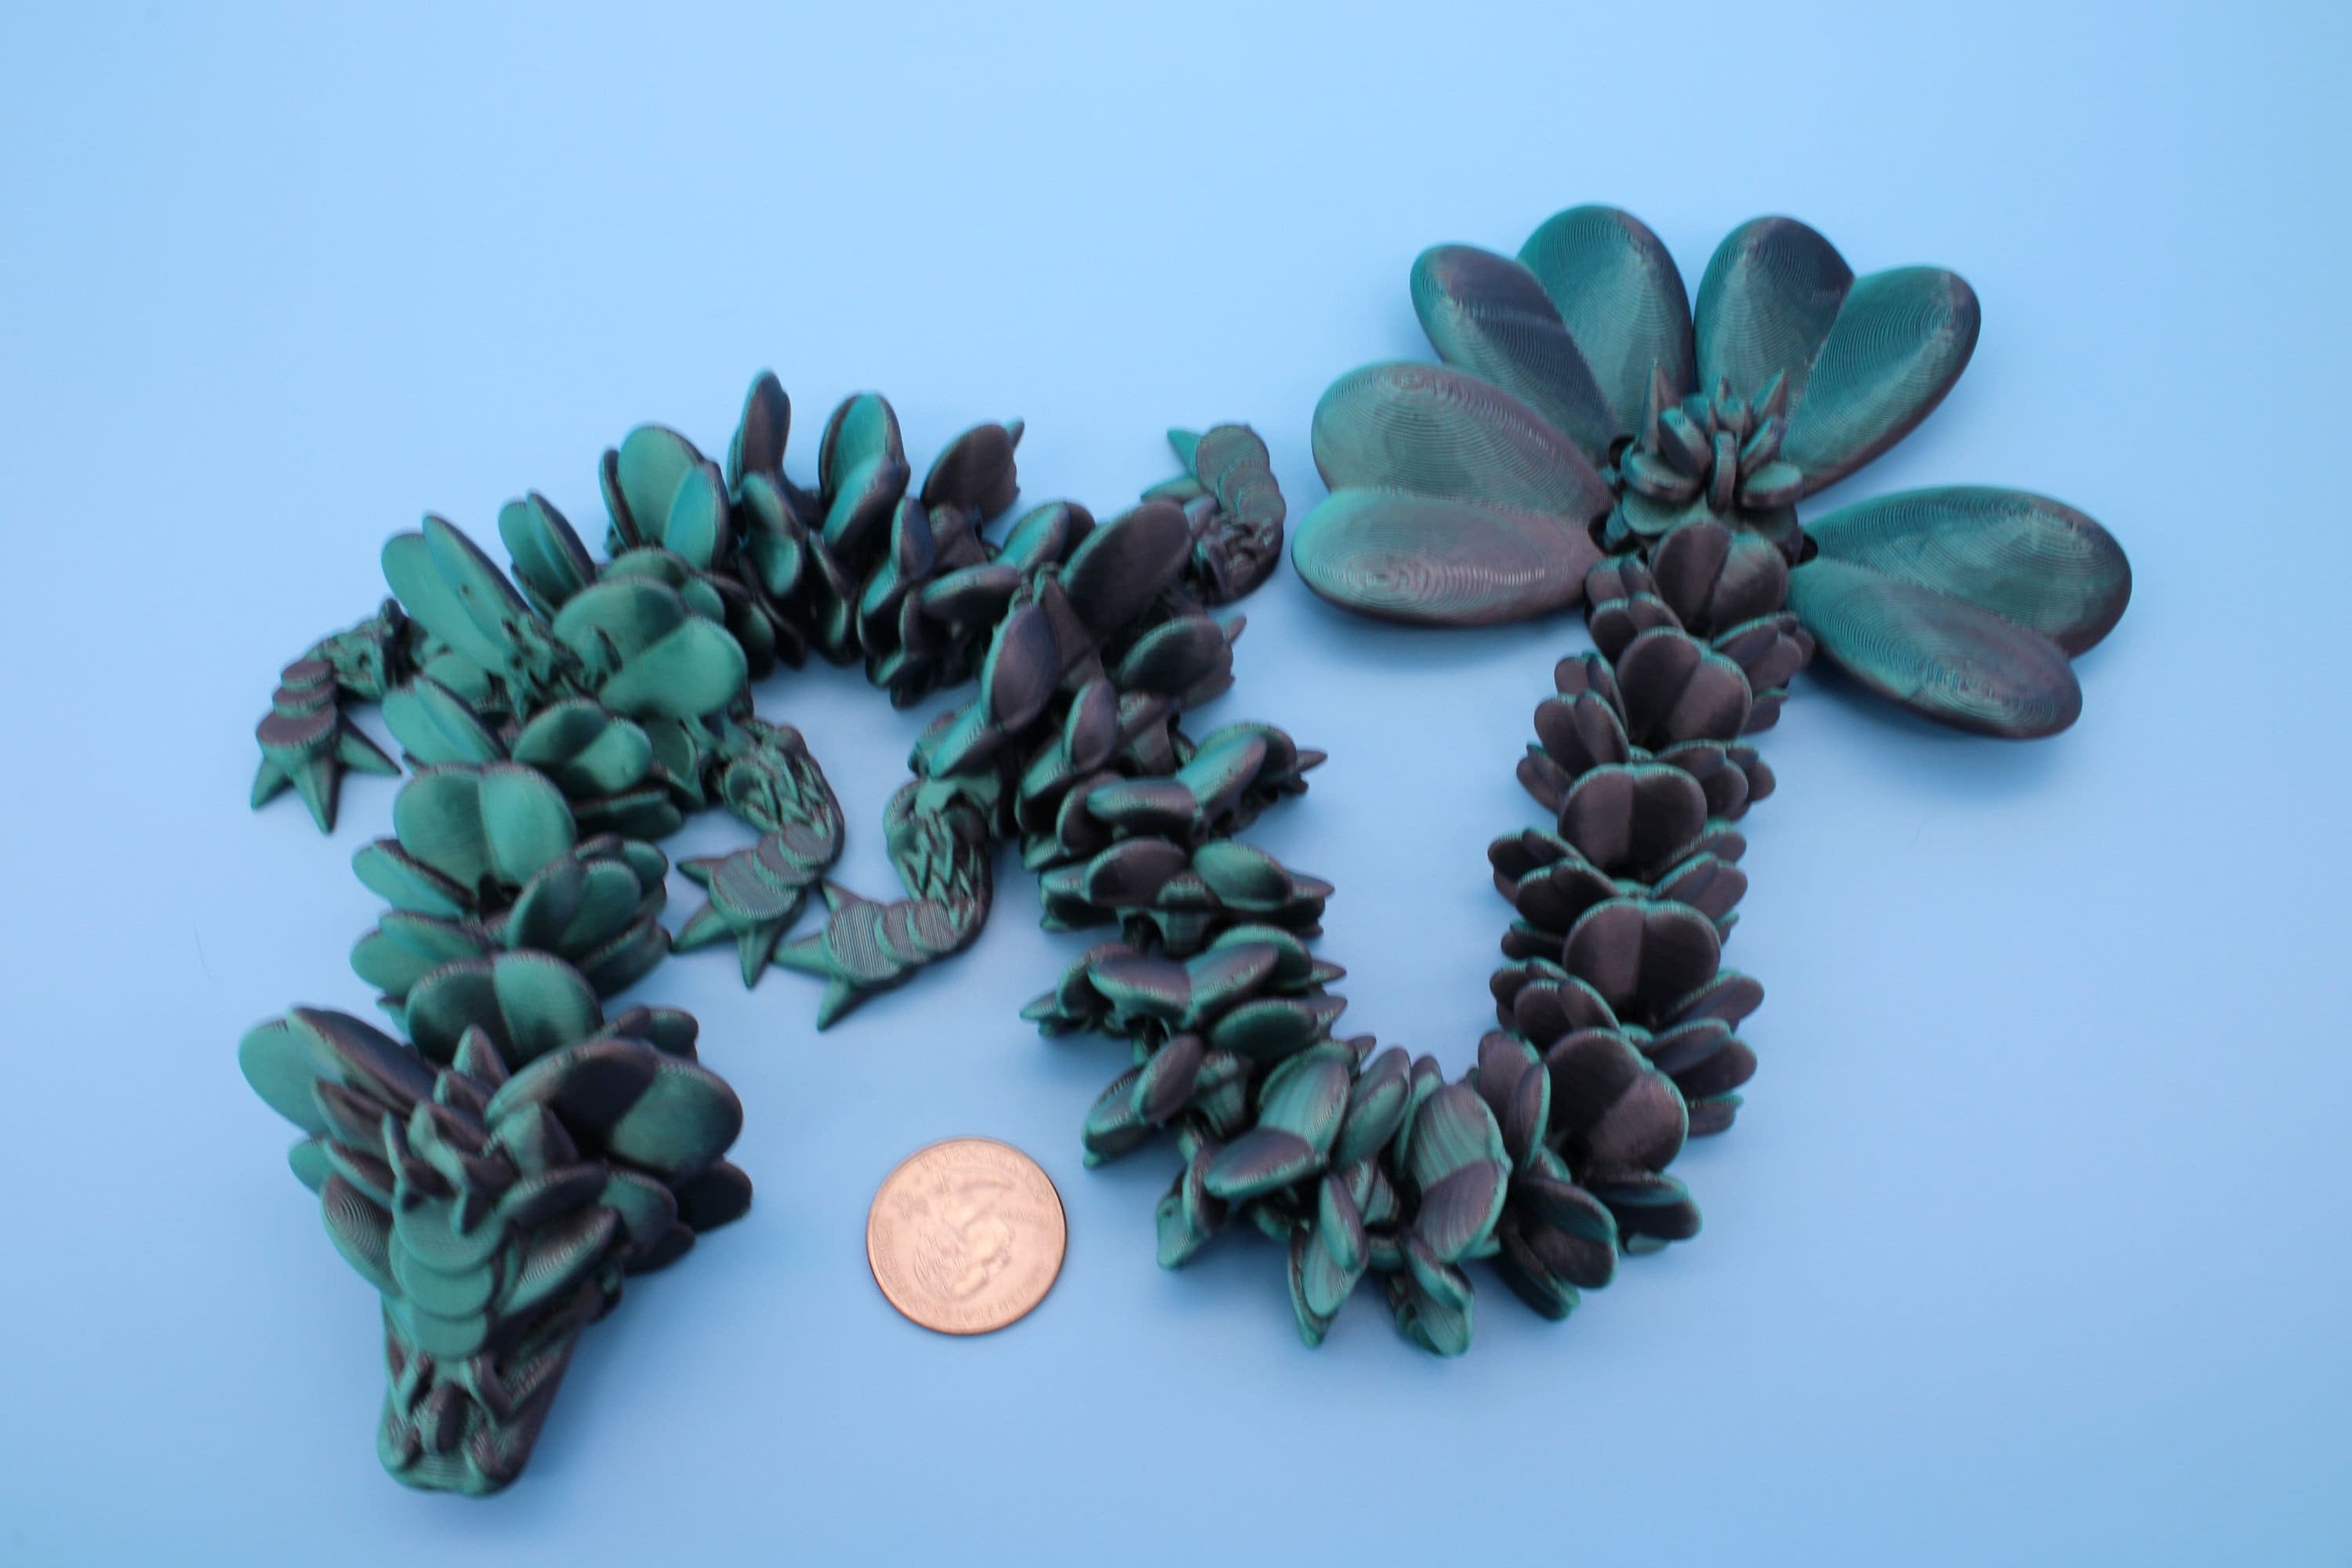 Clover Dragon | Green & Black | St. Patrick's Day |3D printed Articulating Dragon Fidget Toy | Flexi | 18 in. Lucky Dragon | 4 Leaf Clover